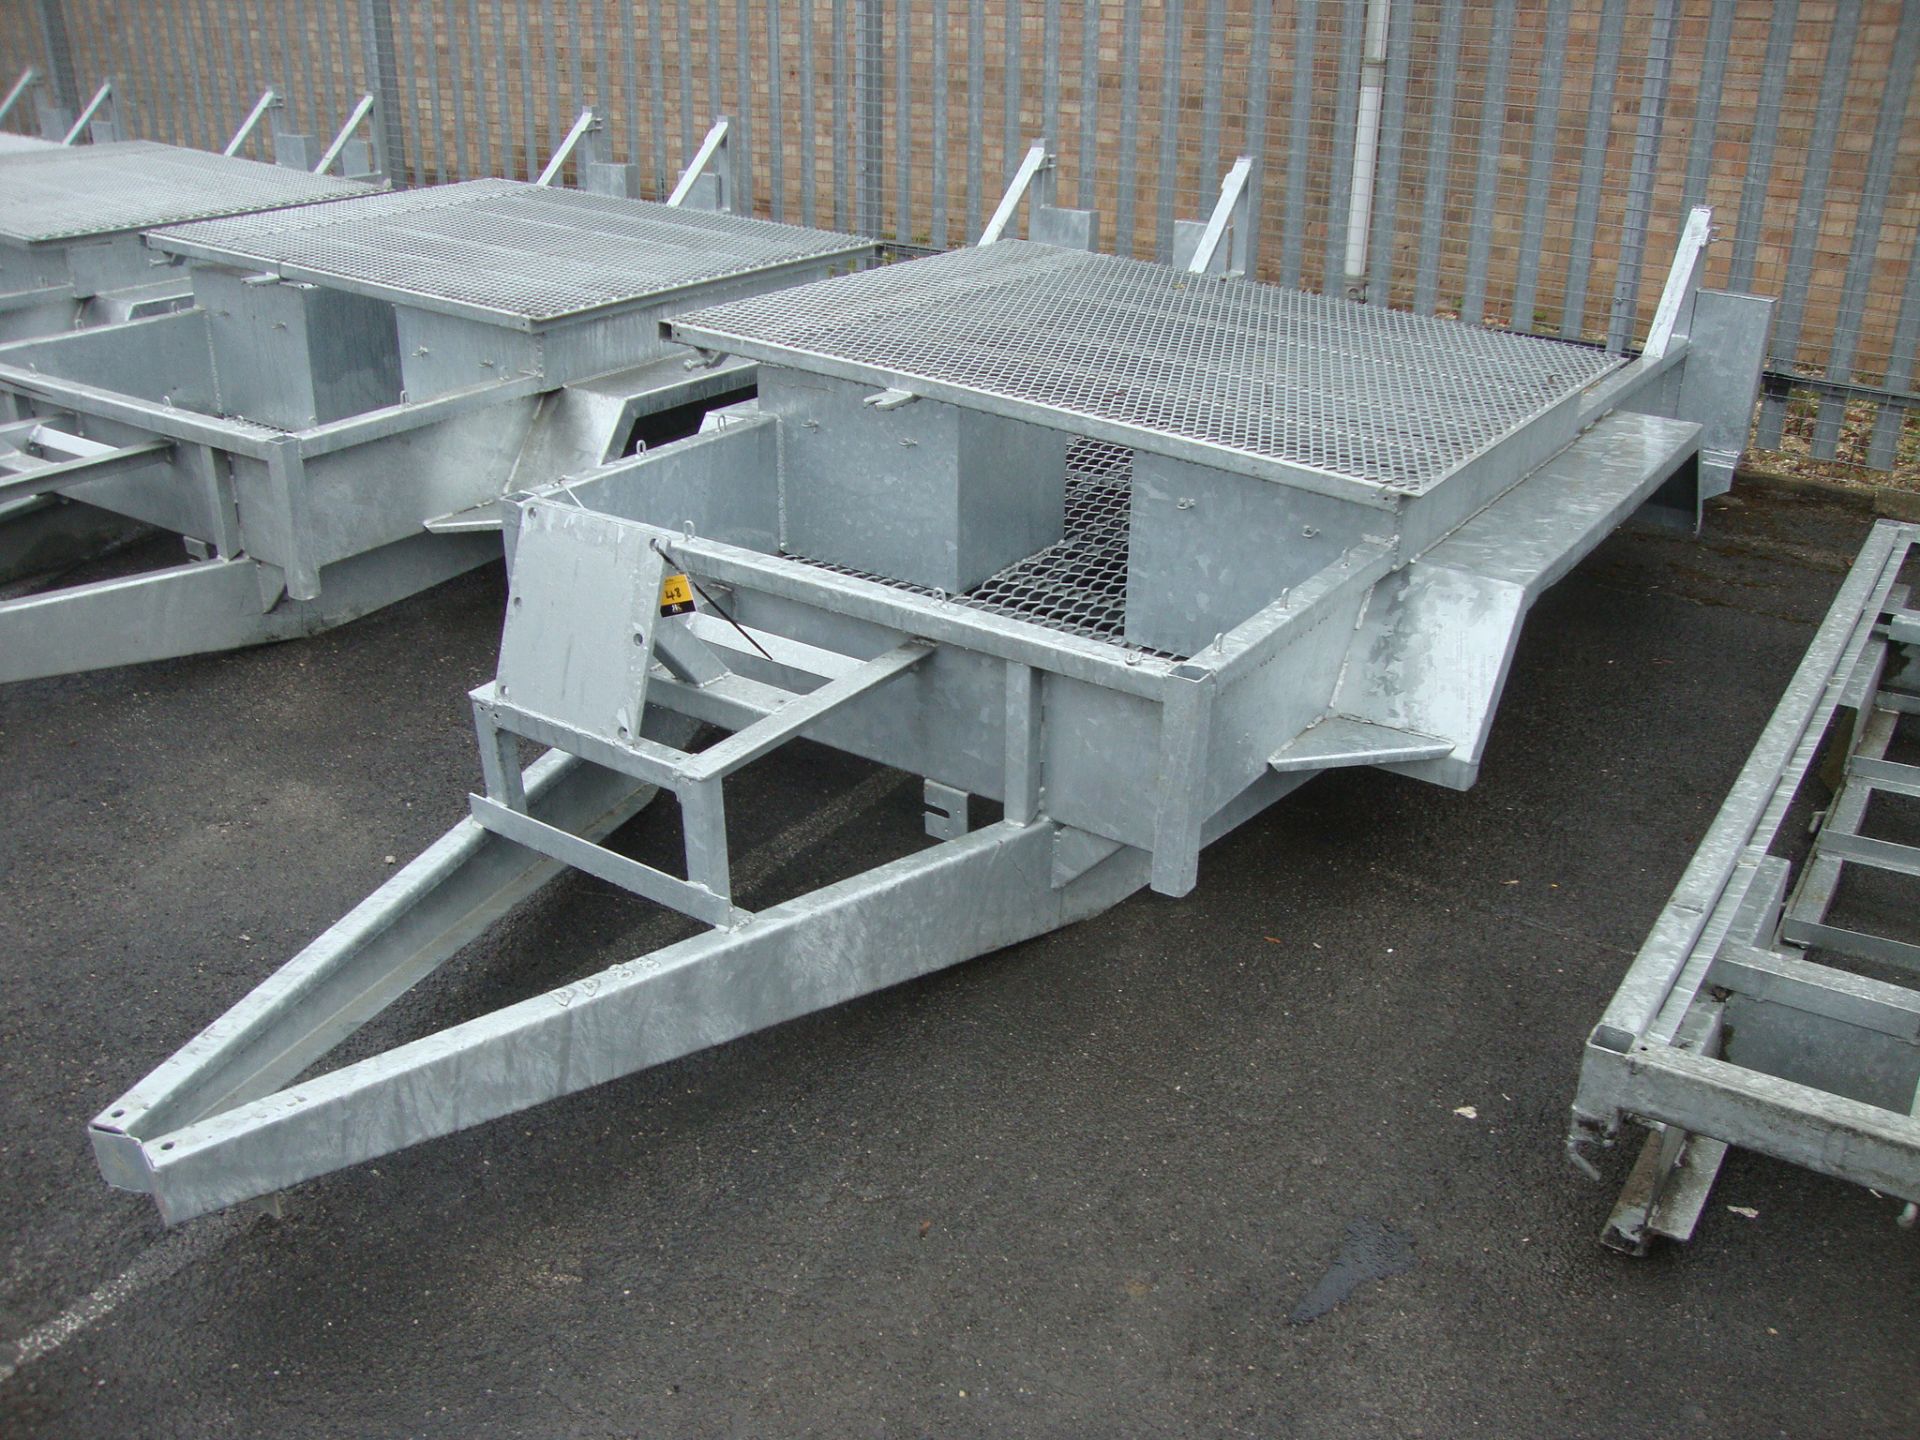 Mini digger/excavator trailer chassis, in galvanised steel, incorporating shrouds for driving the - Image 2 of 4